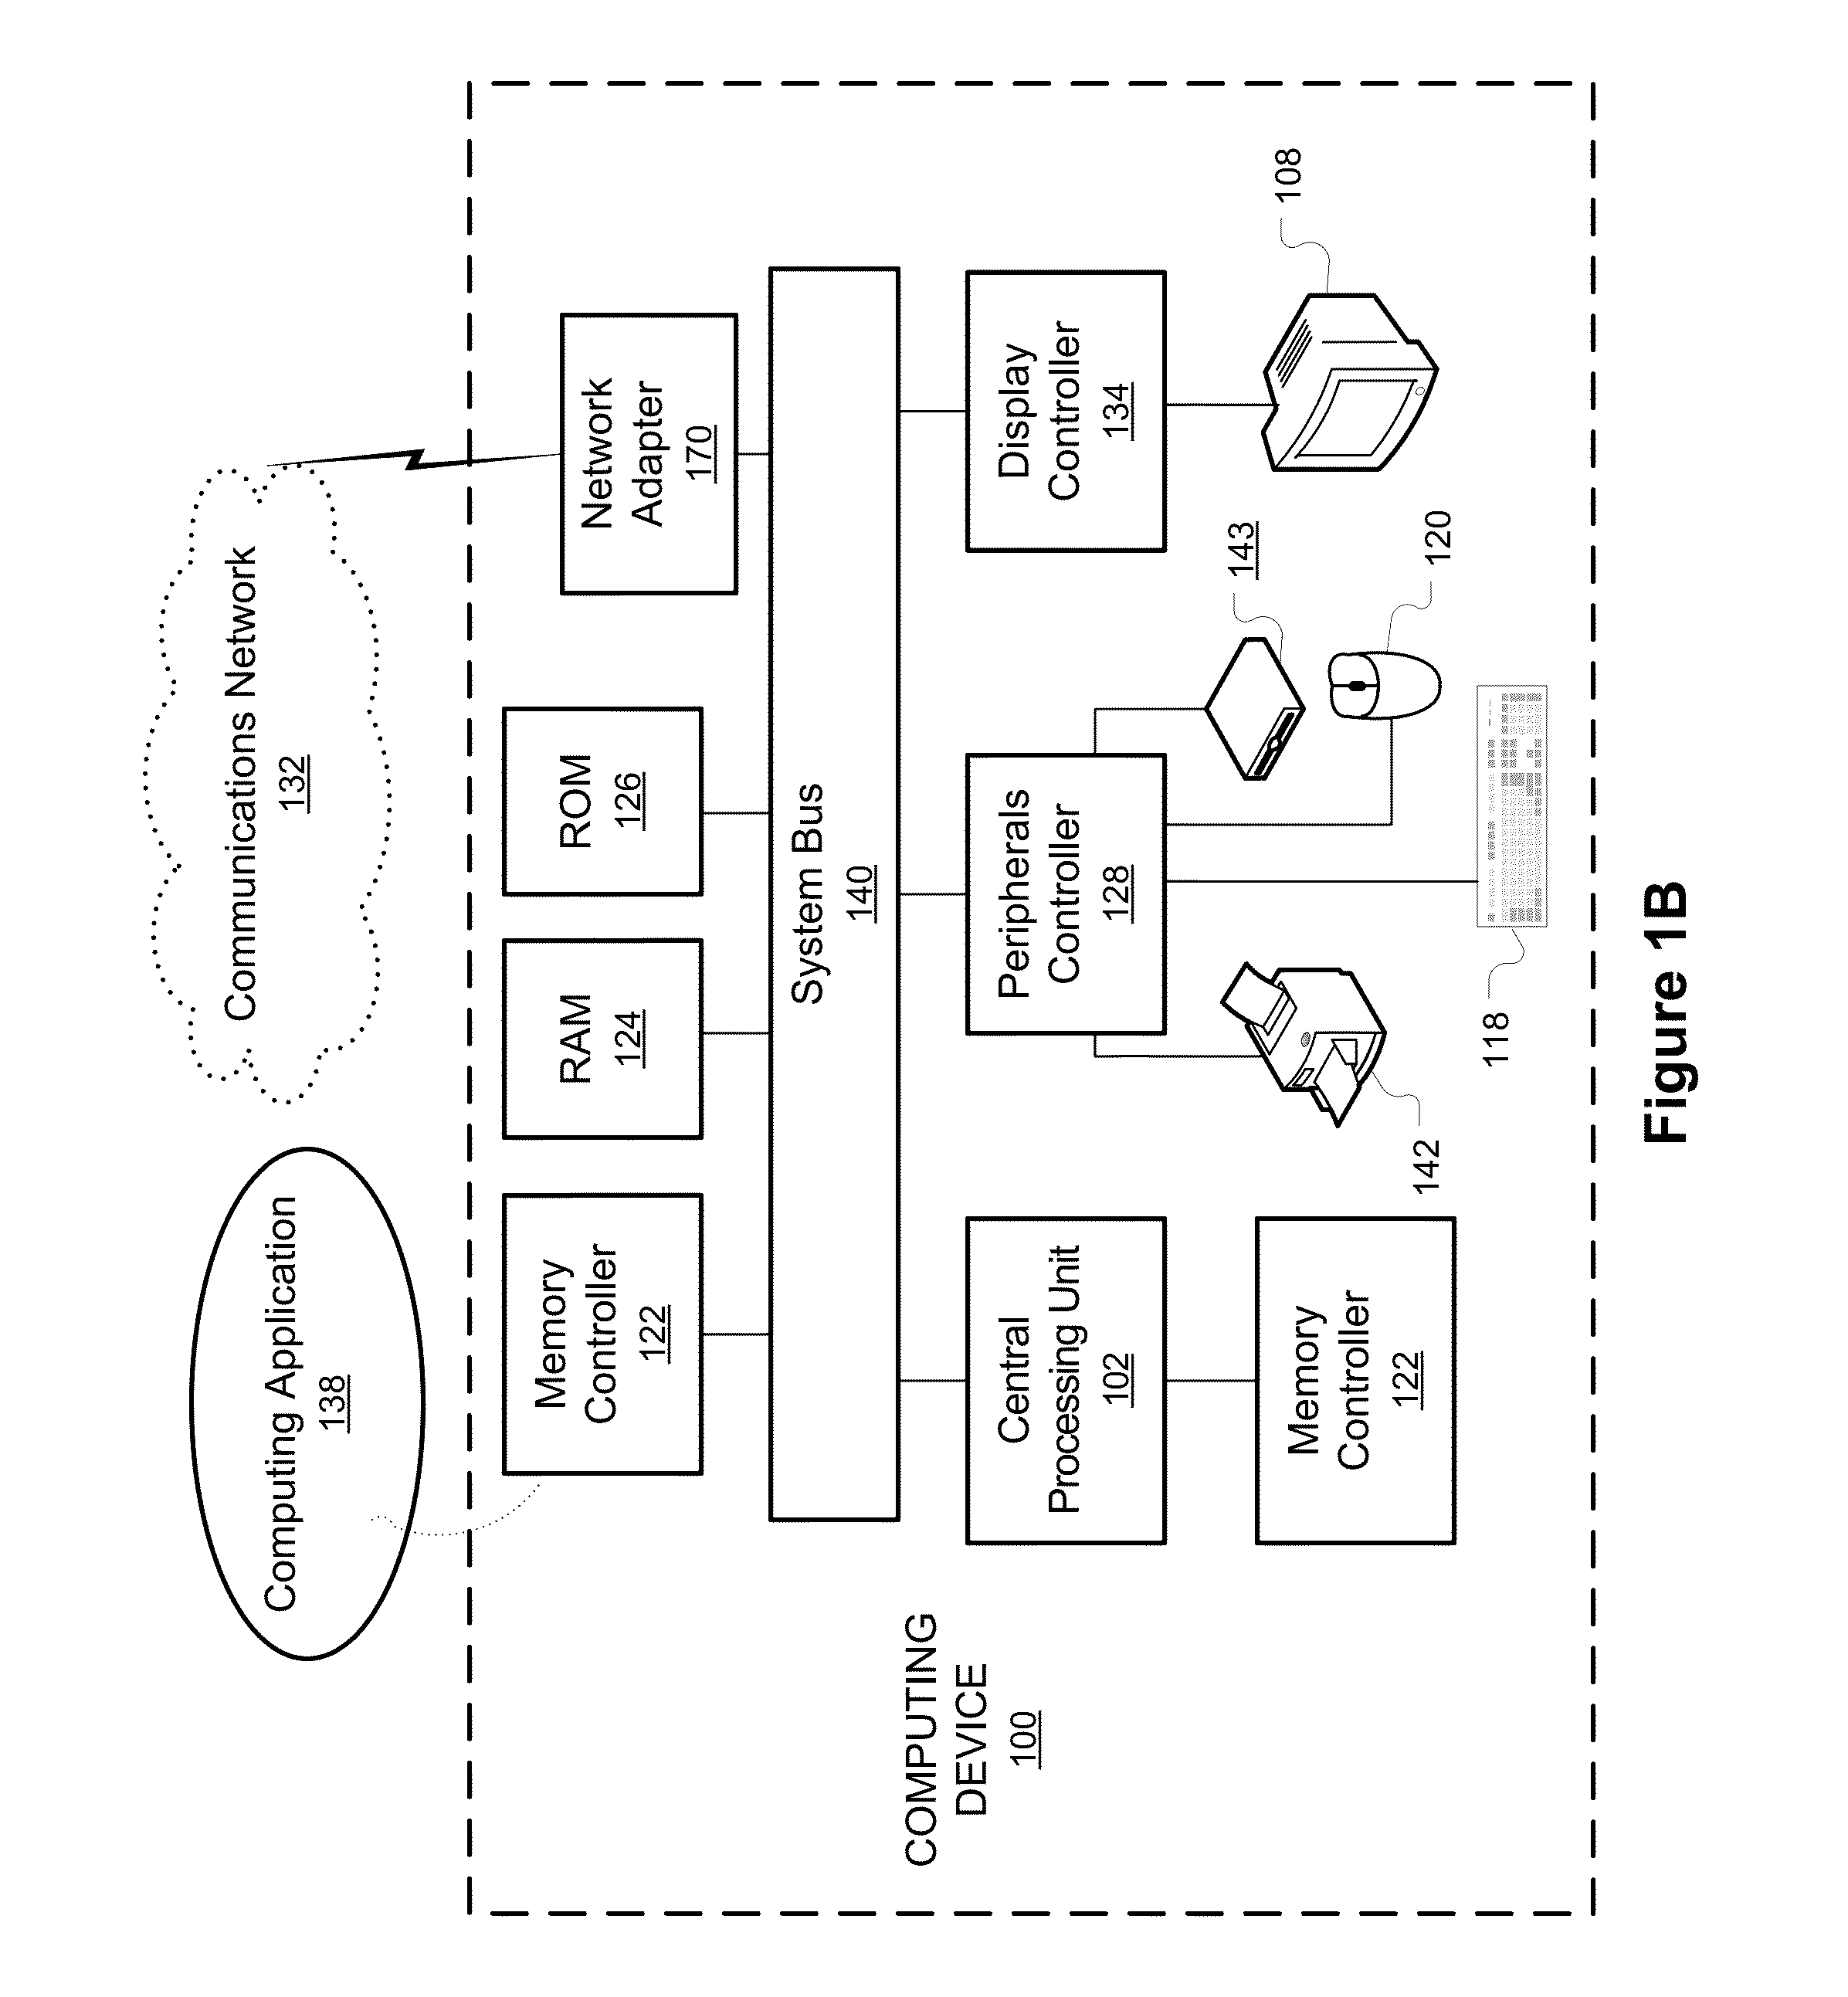 System and process to facilitate course registration and optimal class selection